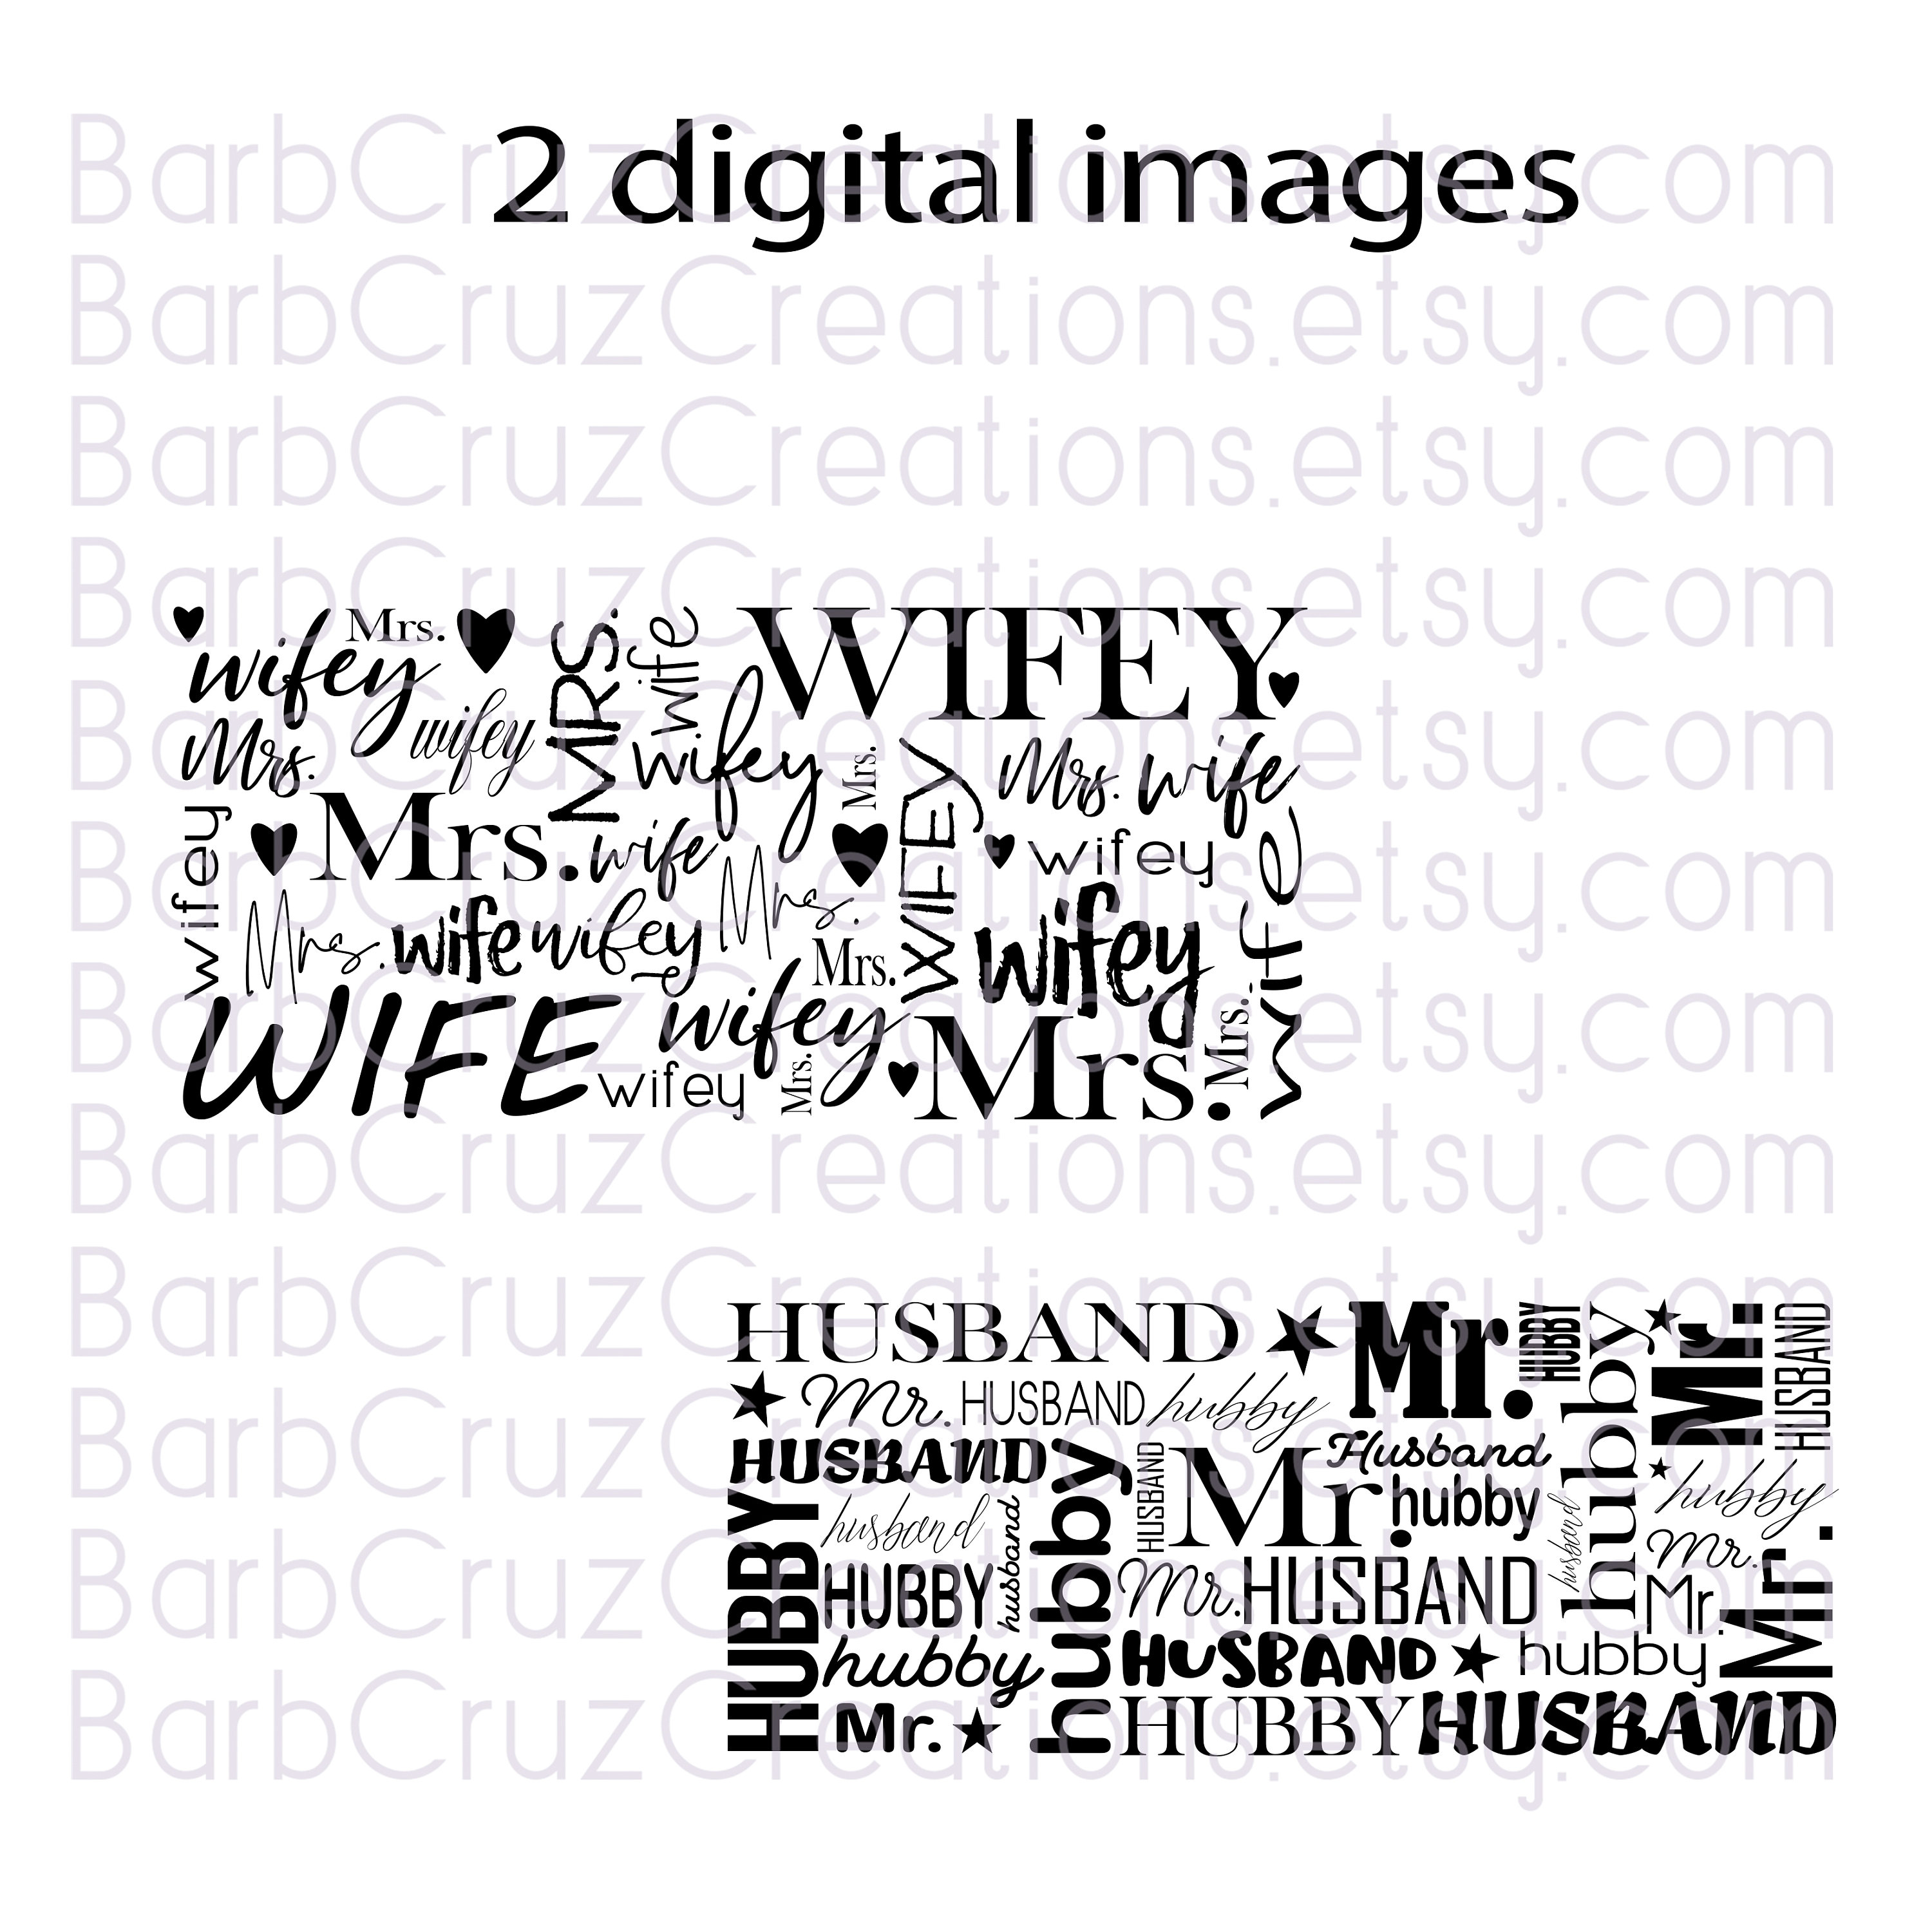 wifey, hubby, coffee cup images, wife, husband, Mr., Mrs., Digital ...